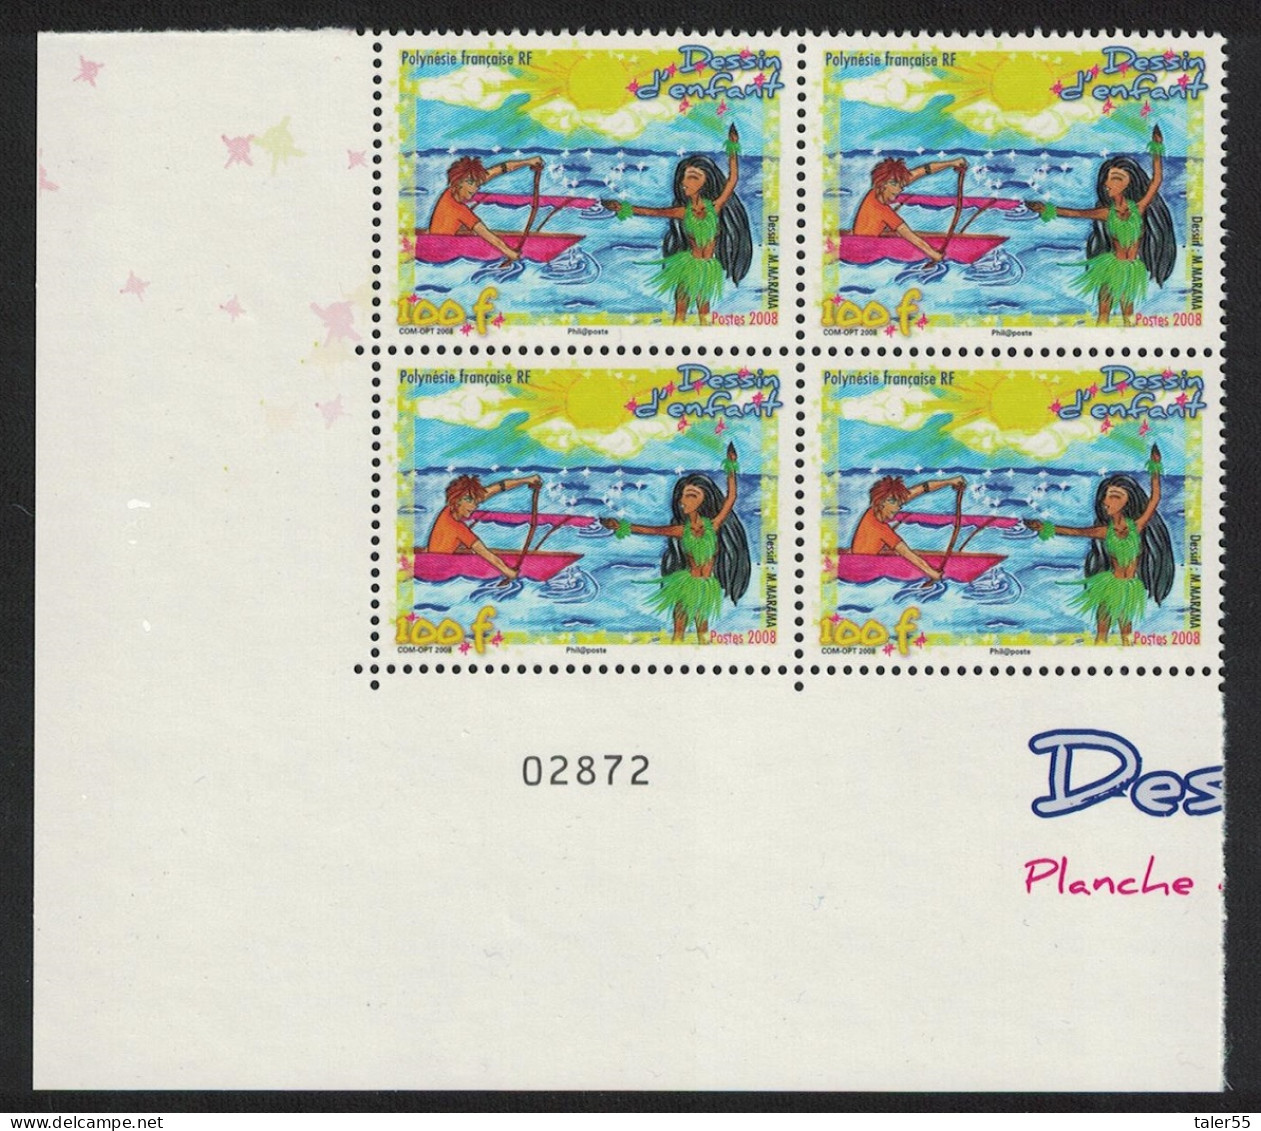 Fr. Polynesia Christmas Children's Drawings Block Of 4 Control Number 2008 MNH SG#1109 MI#1061 - Nuovi